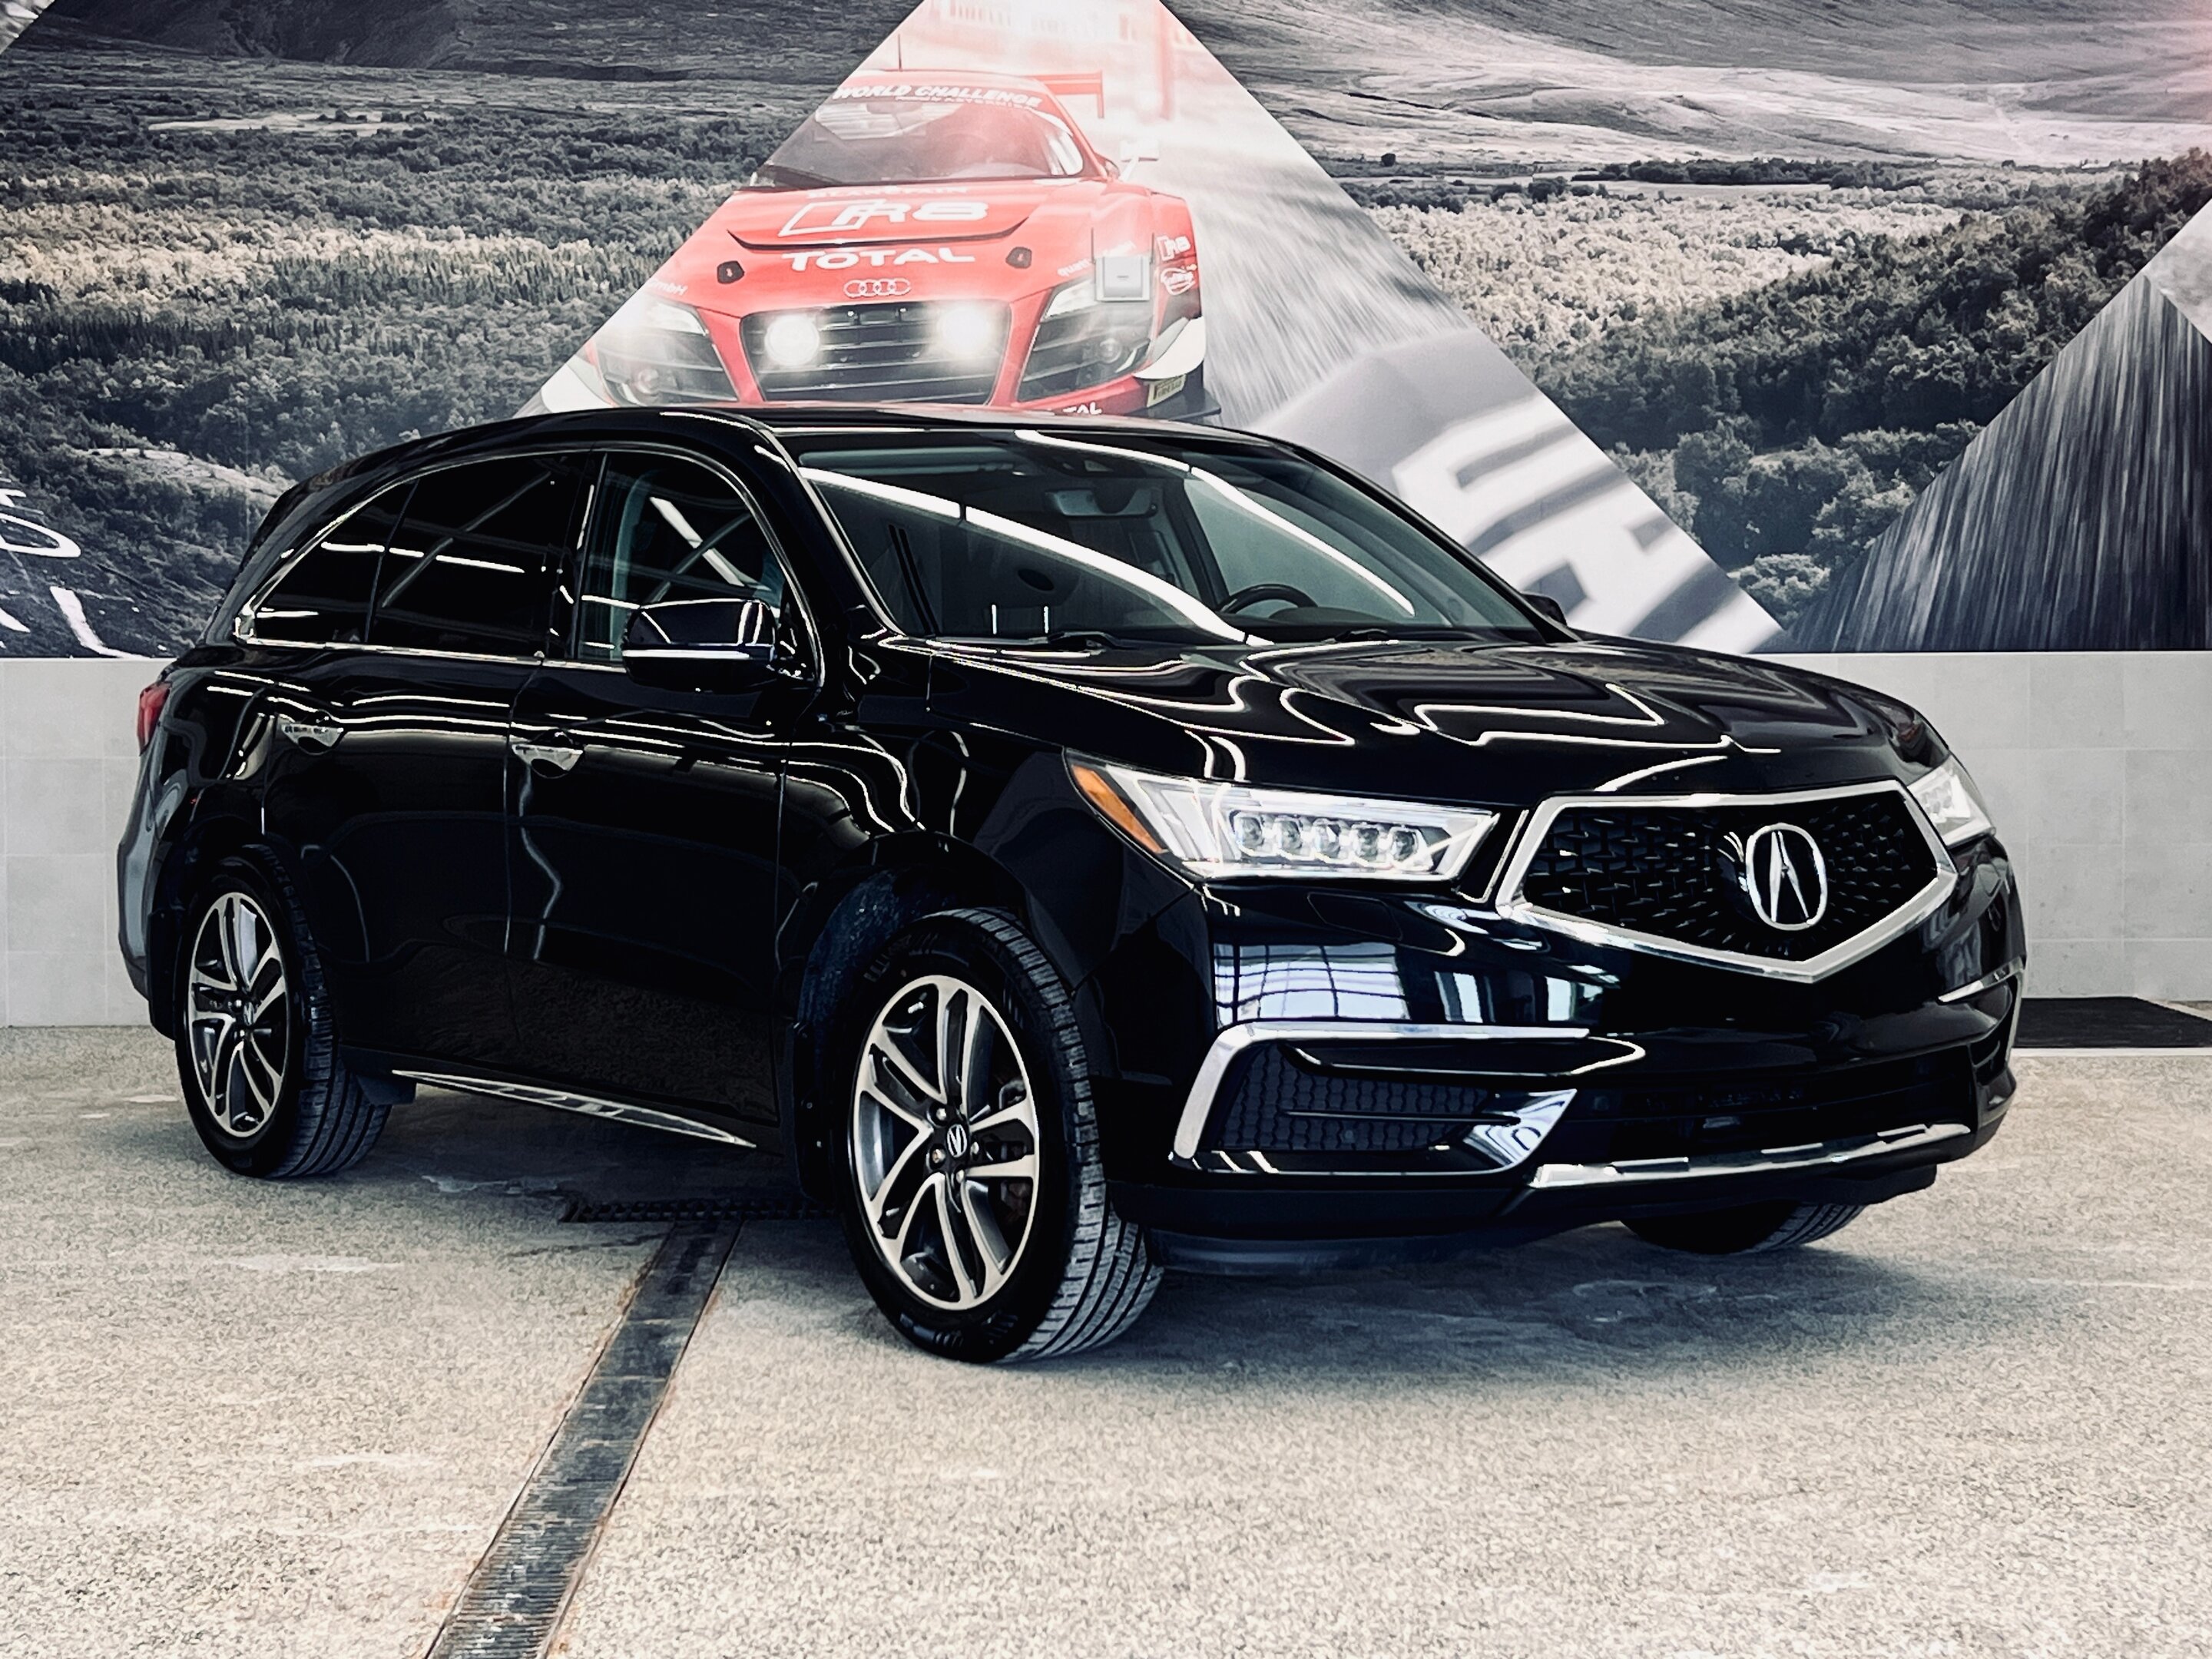 2017 Acura MDX Navigation Package